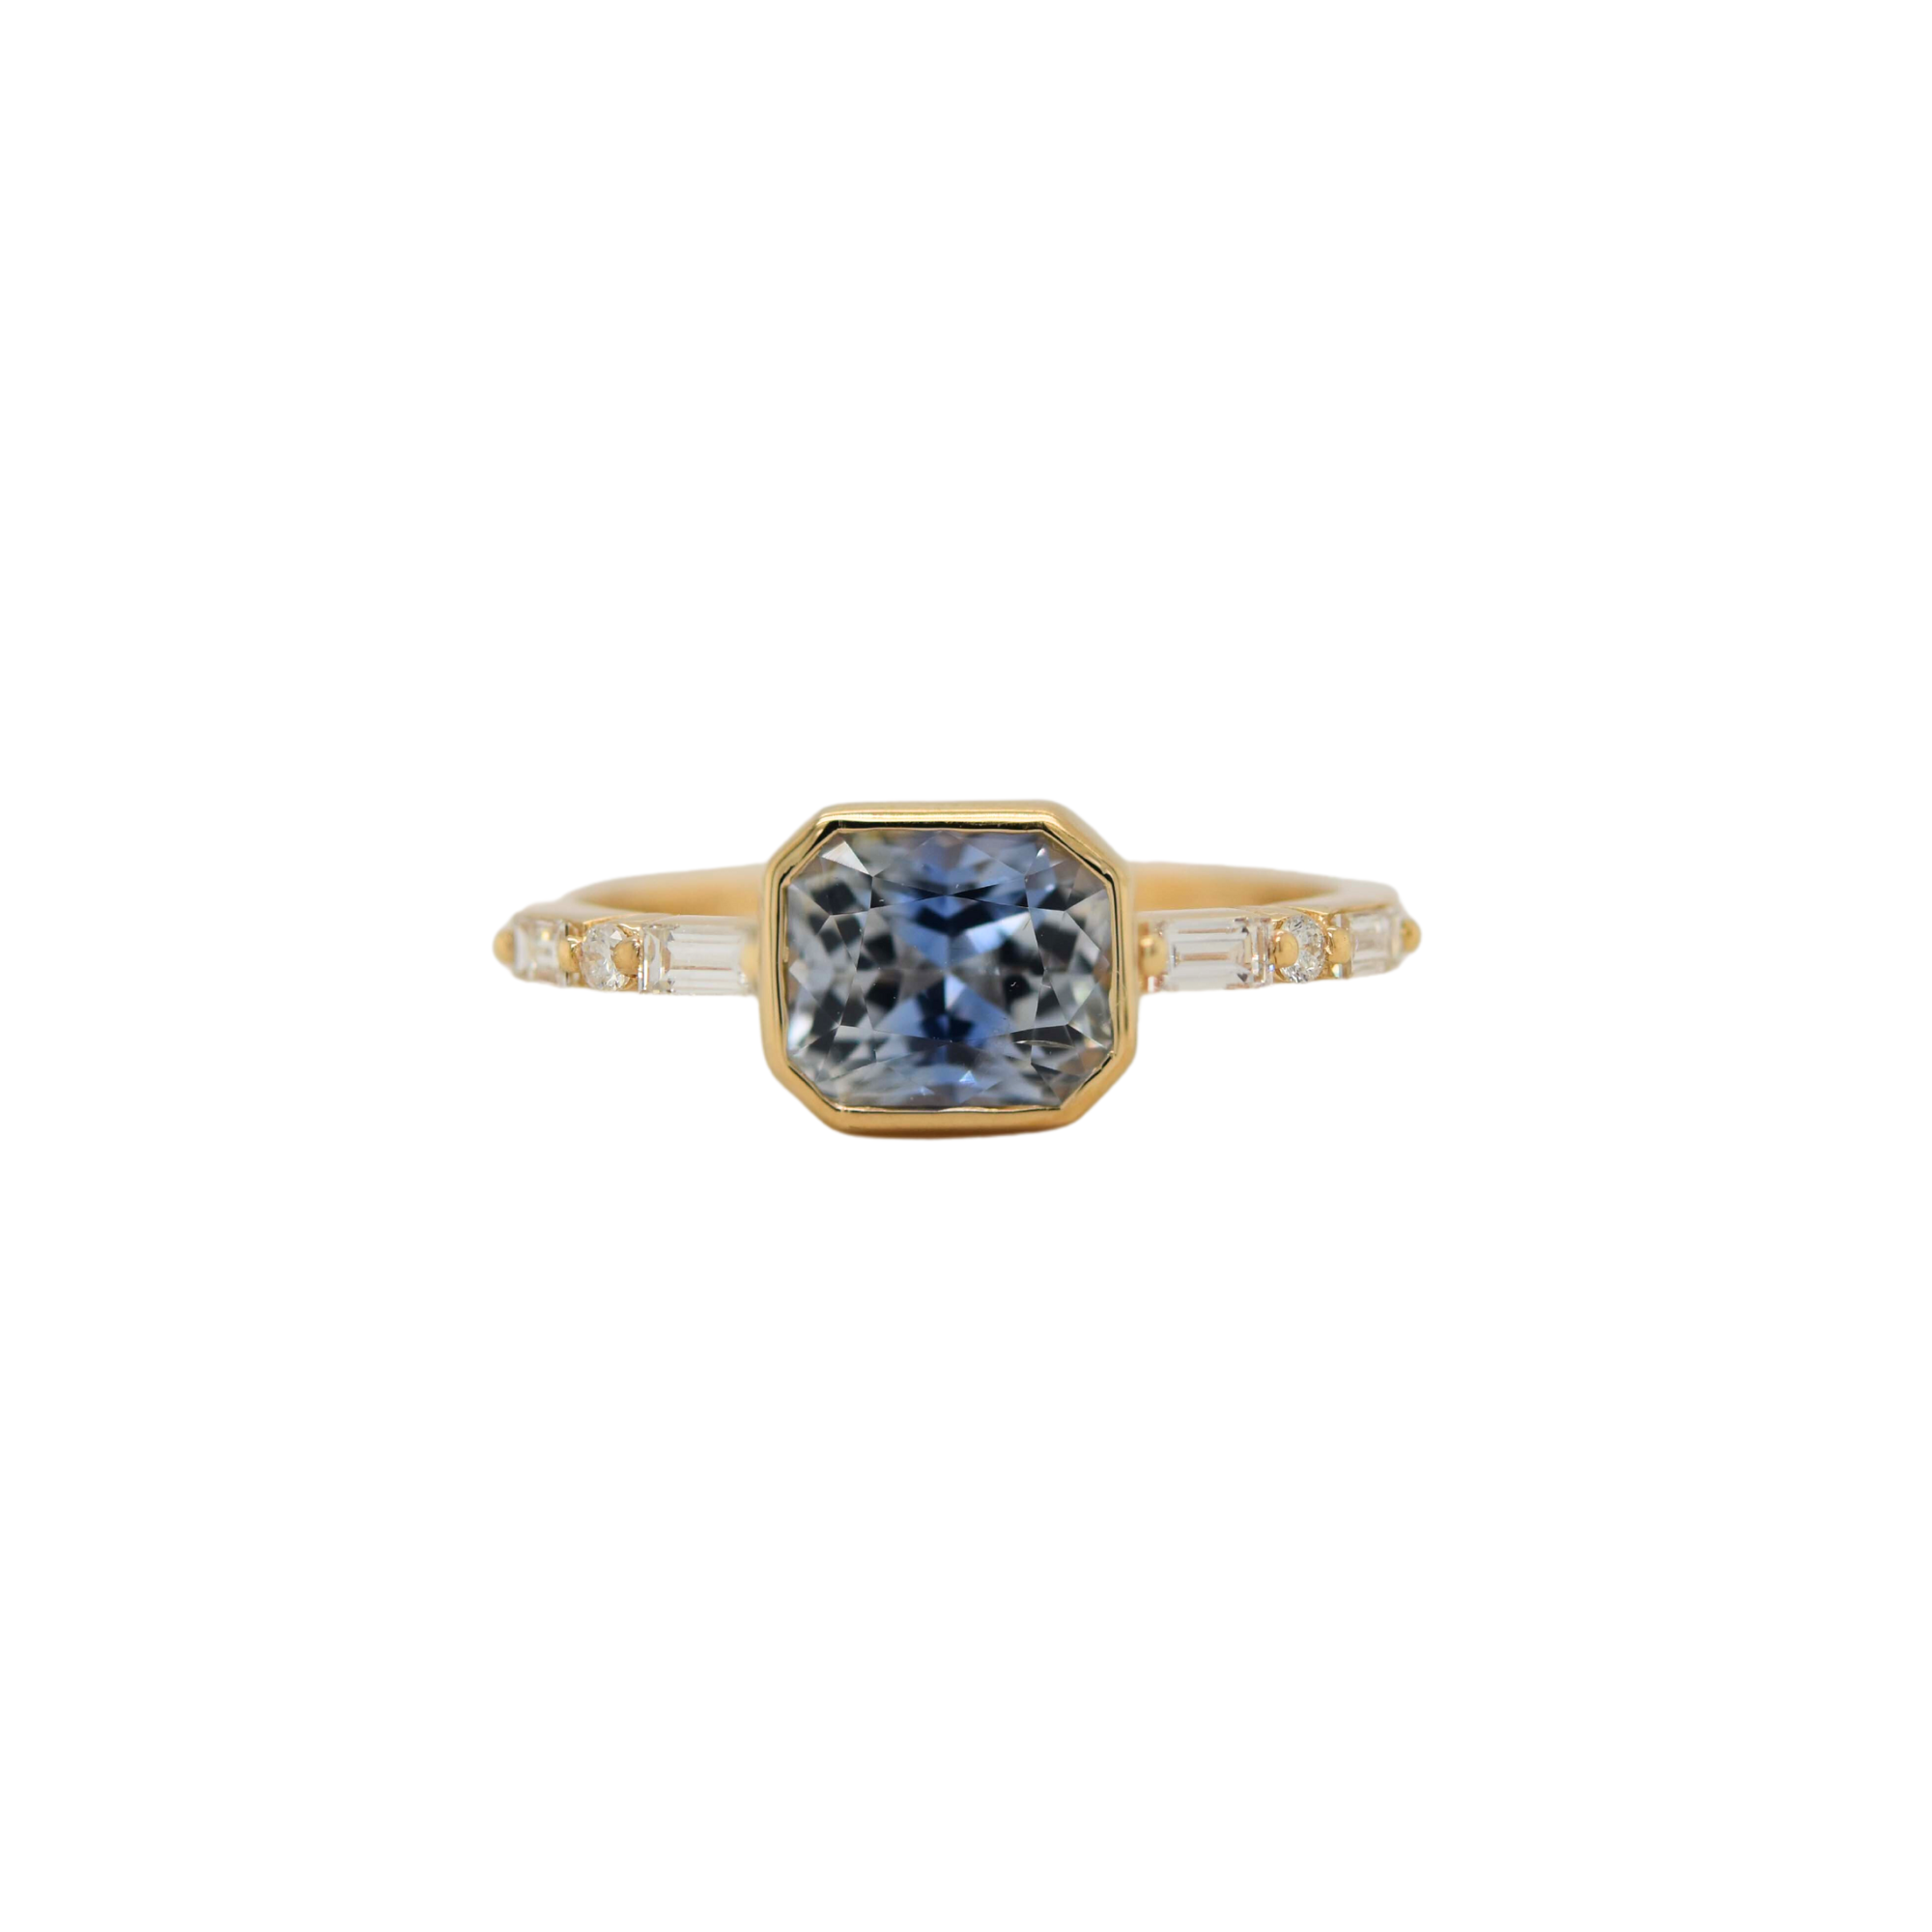 Shelter Anniversary Collection: One Of A Kind Emerald Cut Sapphire Ring